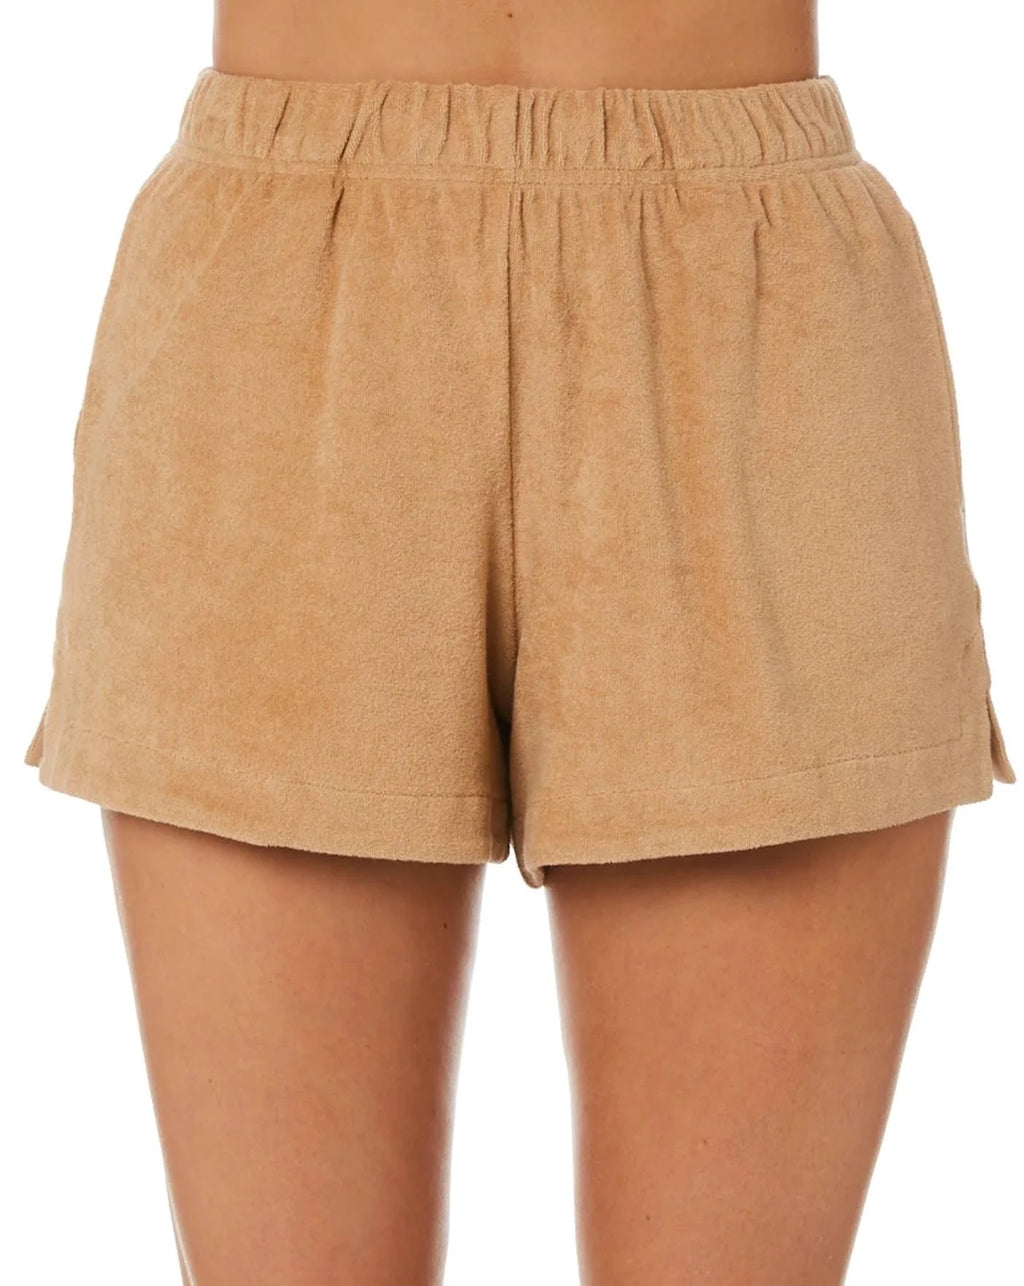 Andesite-nude/tan booty shorts